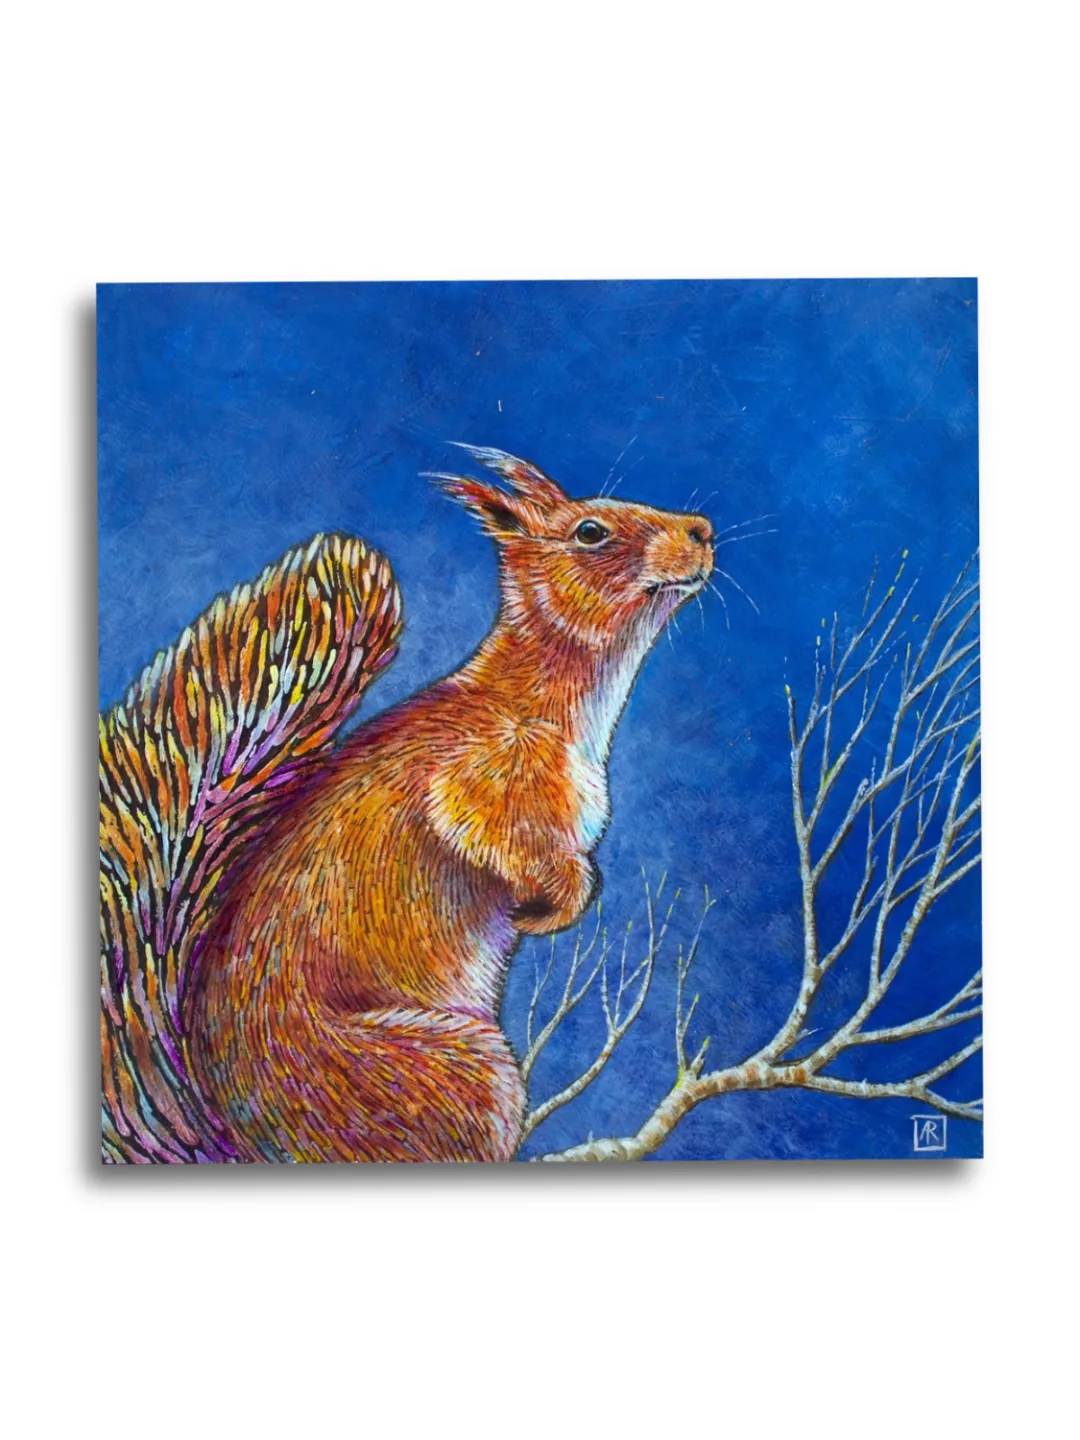 Rainbow Squirrel by Ann Richmond - A stunning, Original artwork featuring a colourful Squirrel. Painted in the artist's unique style... Framing available.